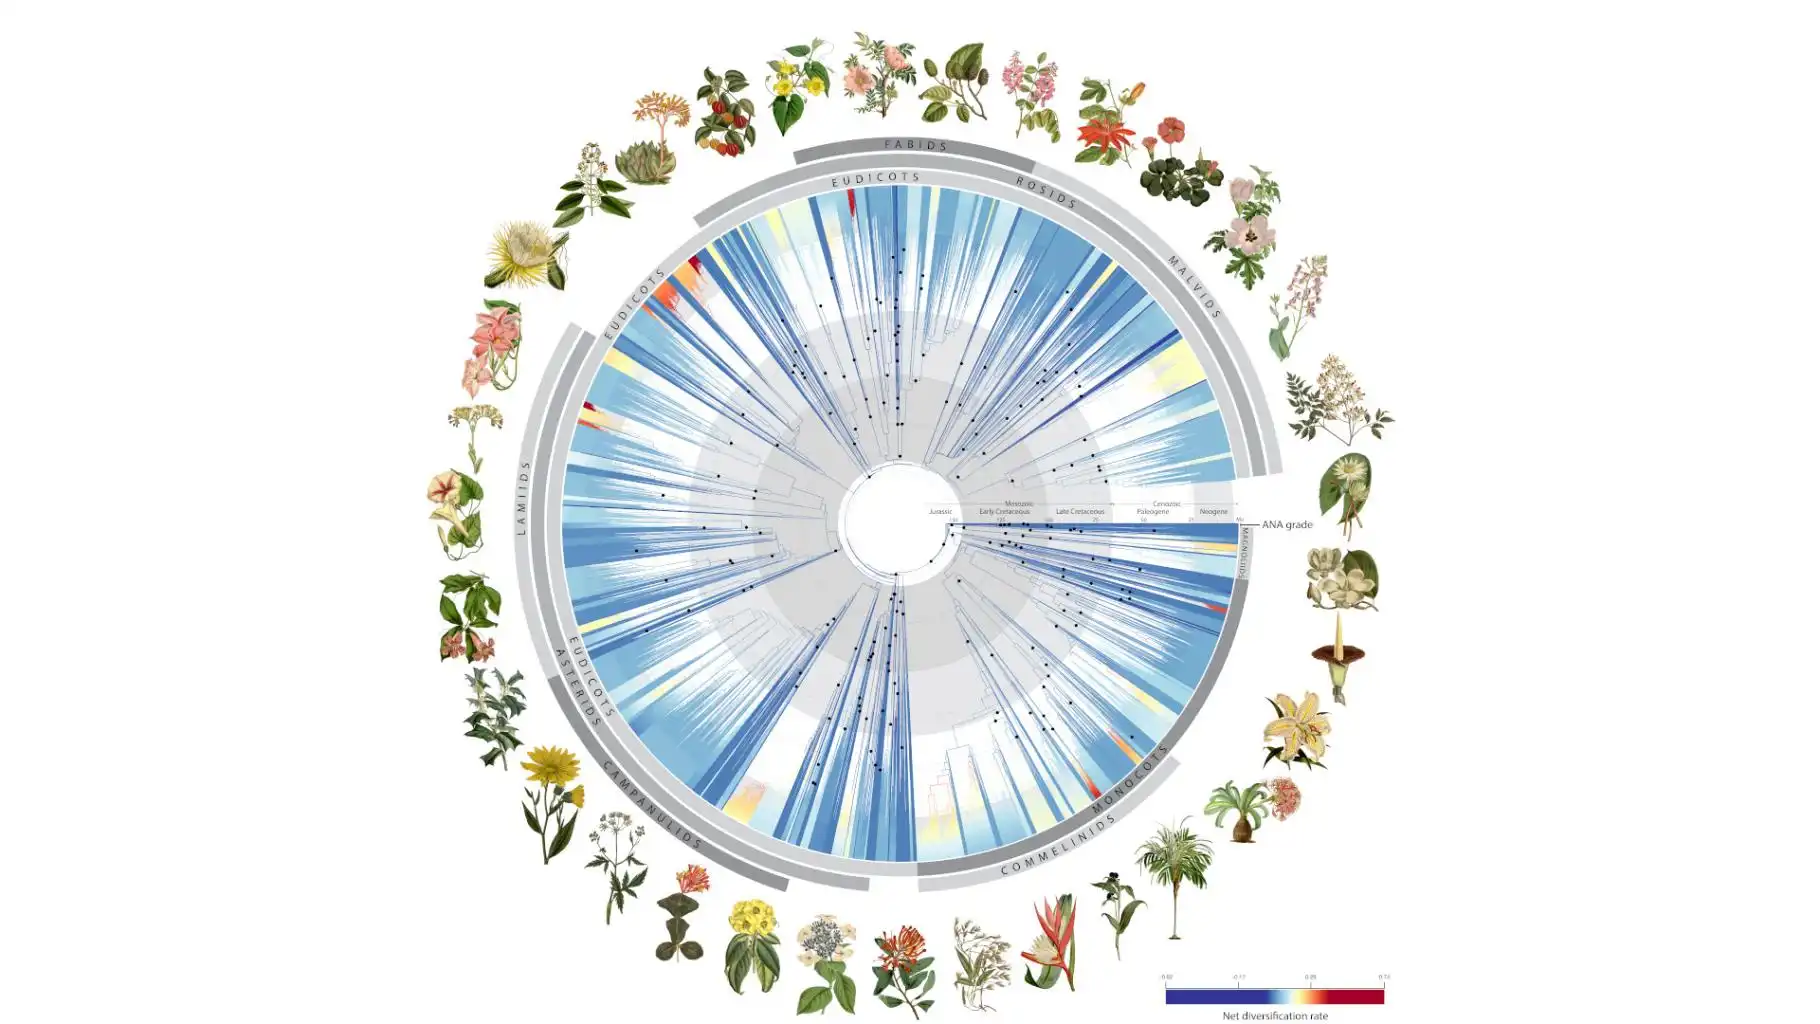 Image credit: The data of the “tree of life” for flowering plants will contribute to identifying new species, refining plant classification, uncovering new medicinal compounds, and conserving plants in the face of climate change and biodiversity loss. | Illustration for the Nature publication “Phylogenomics and the rise of the angiosperms”